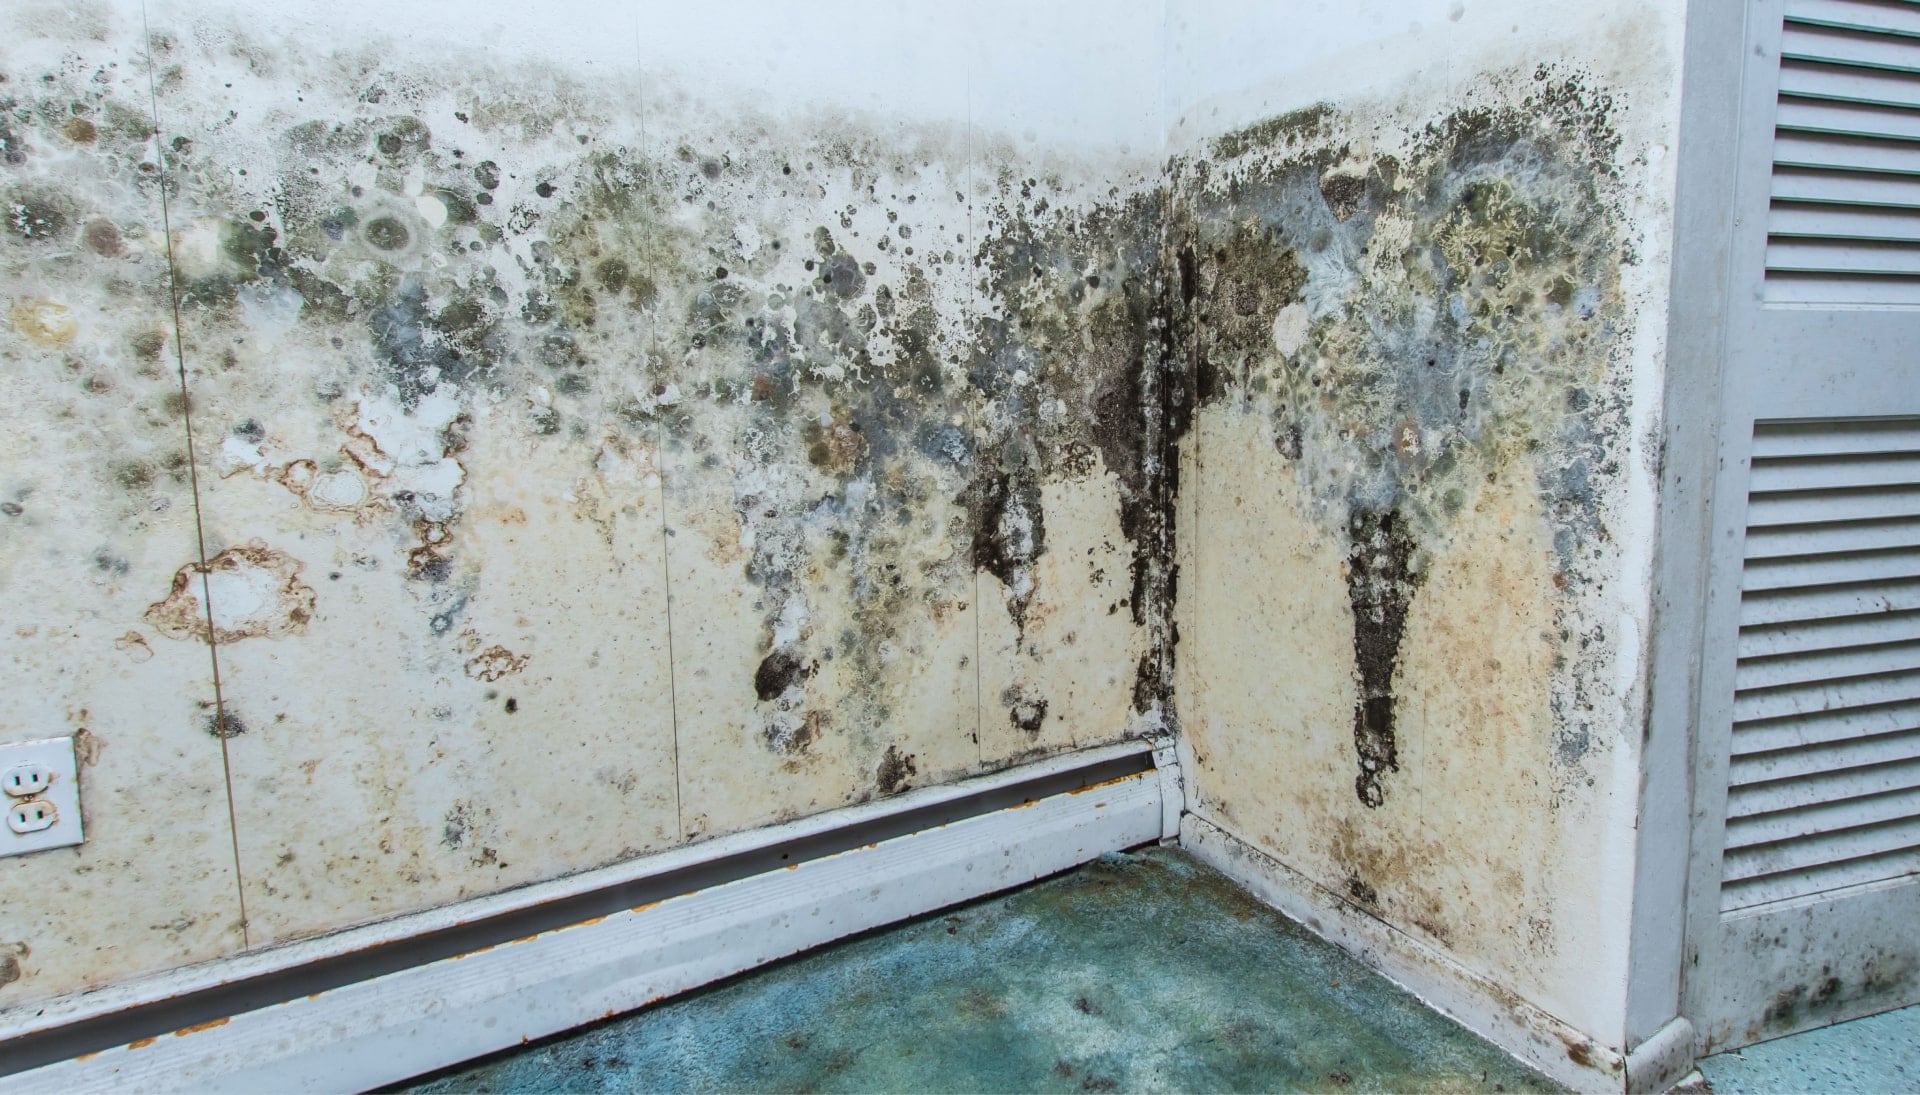 Professional mold removal, odor control, and water damage restoration service in Columbia, South Carolina.